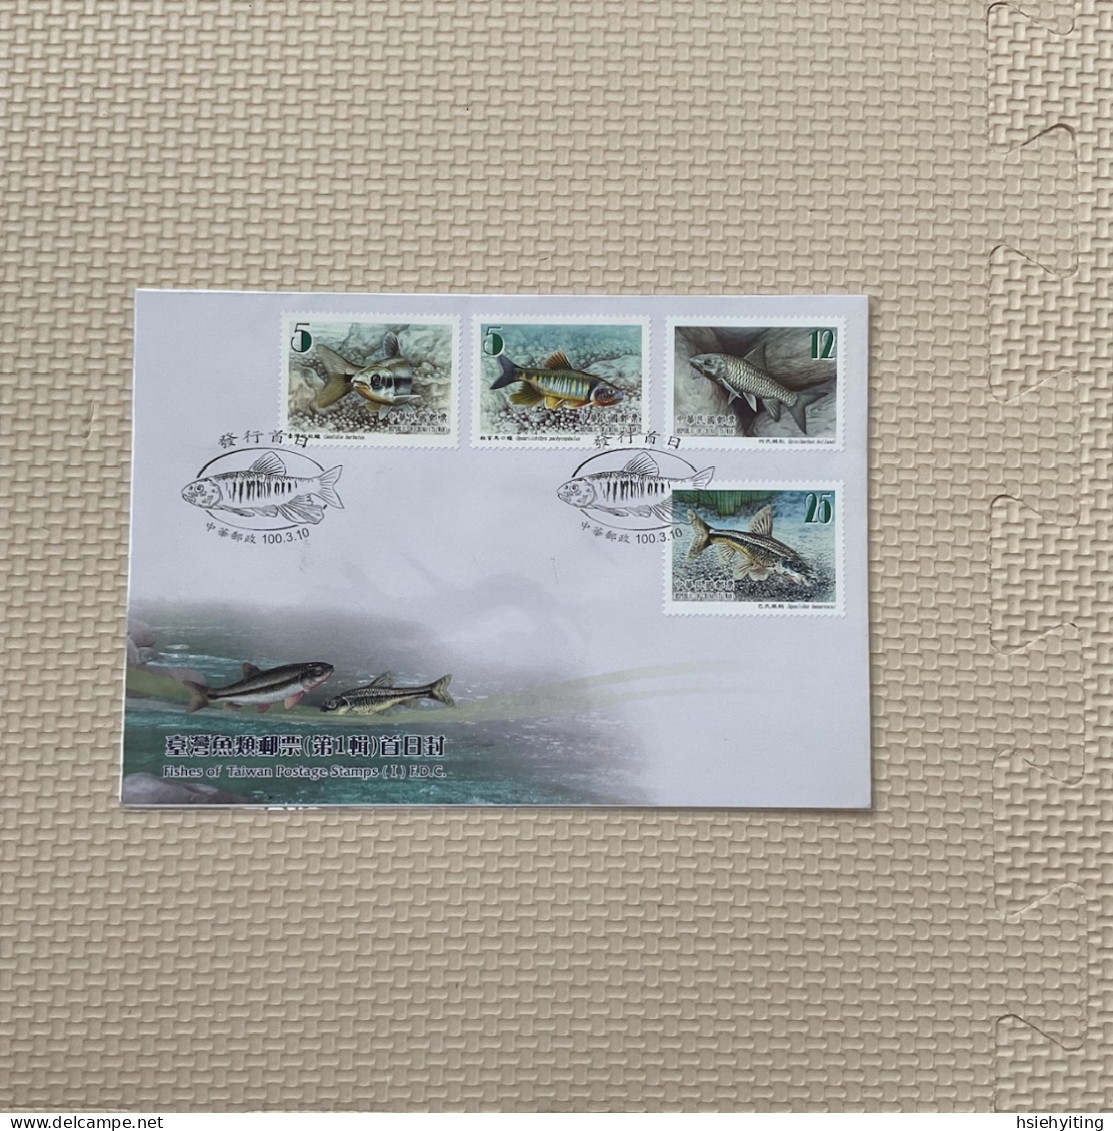 Taiwan Postage Stamps - Peces